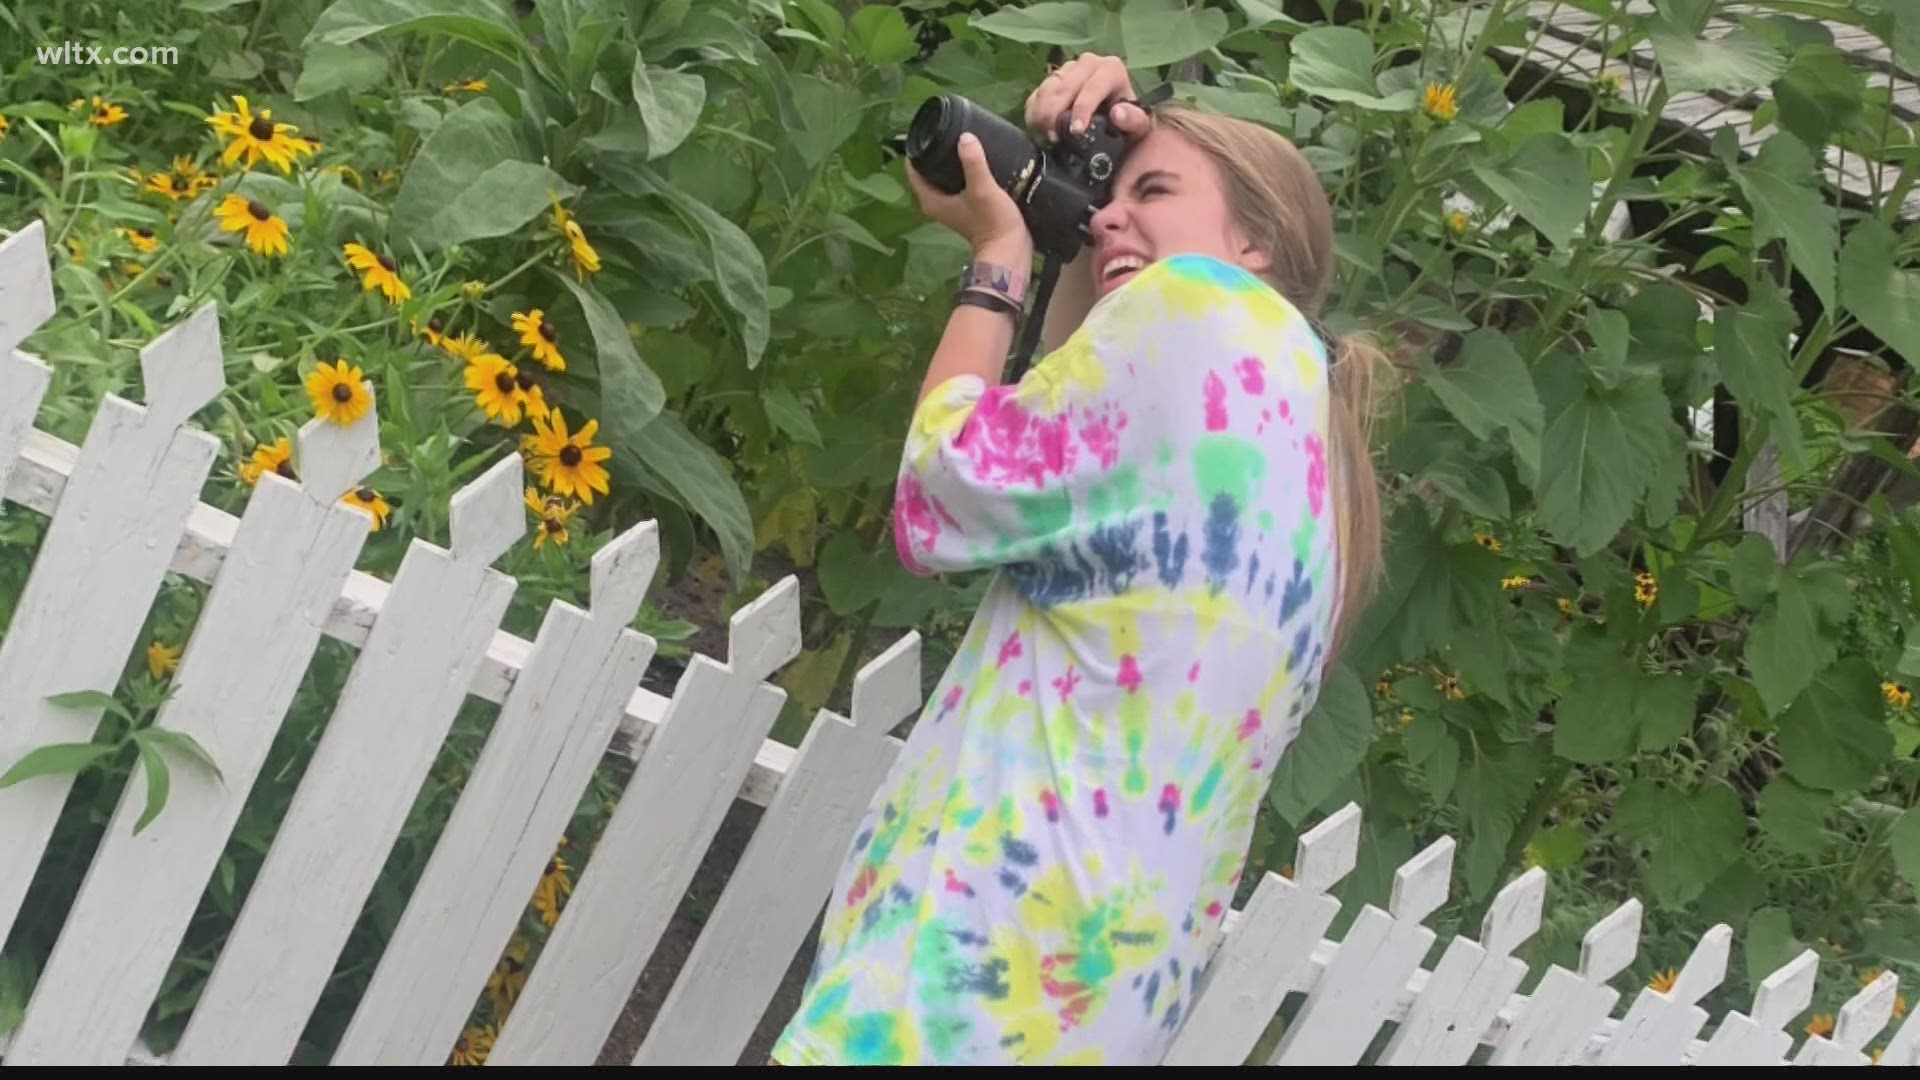 Irmo High School Senior Meredith Joyner picked up her mom's camera in 2020 during the pandemic to find something to do.